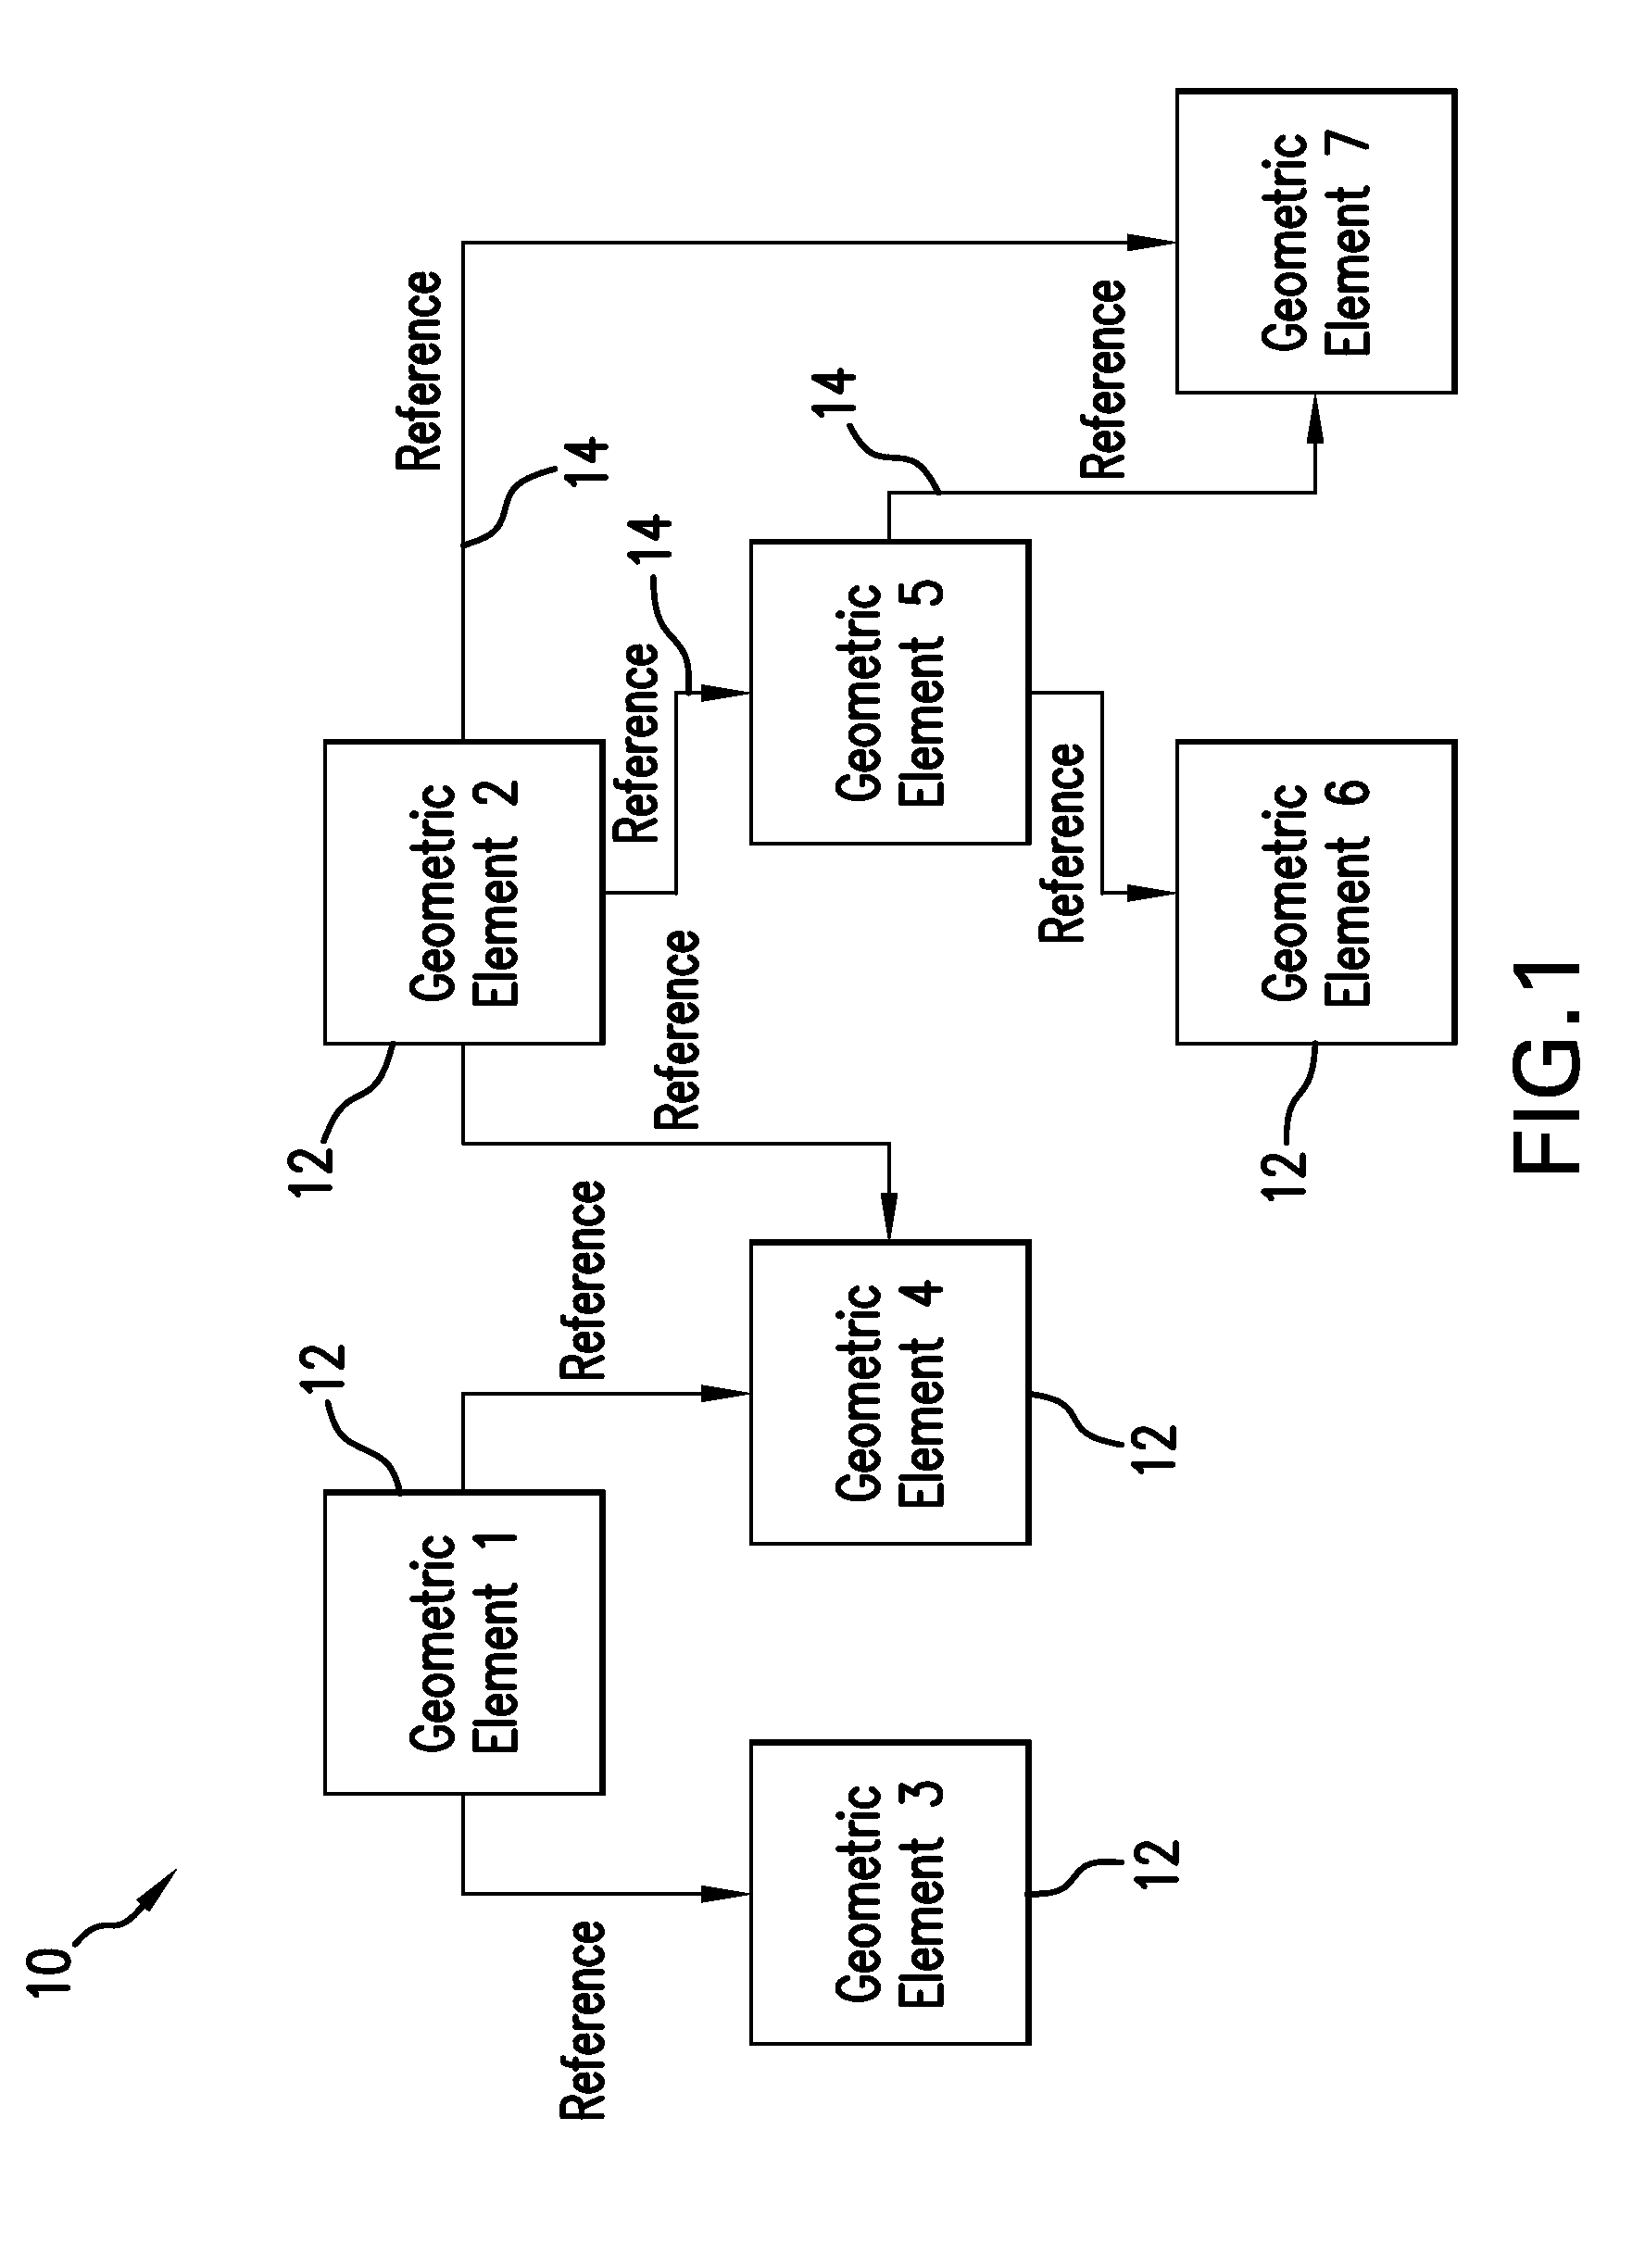 Database driven relational object modeling and design system, method and software